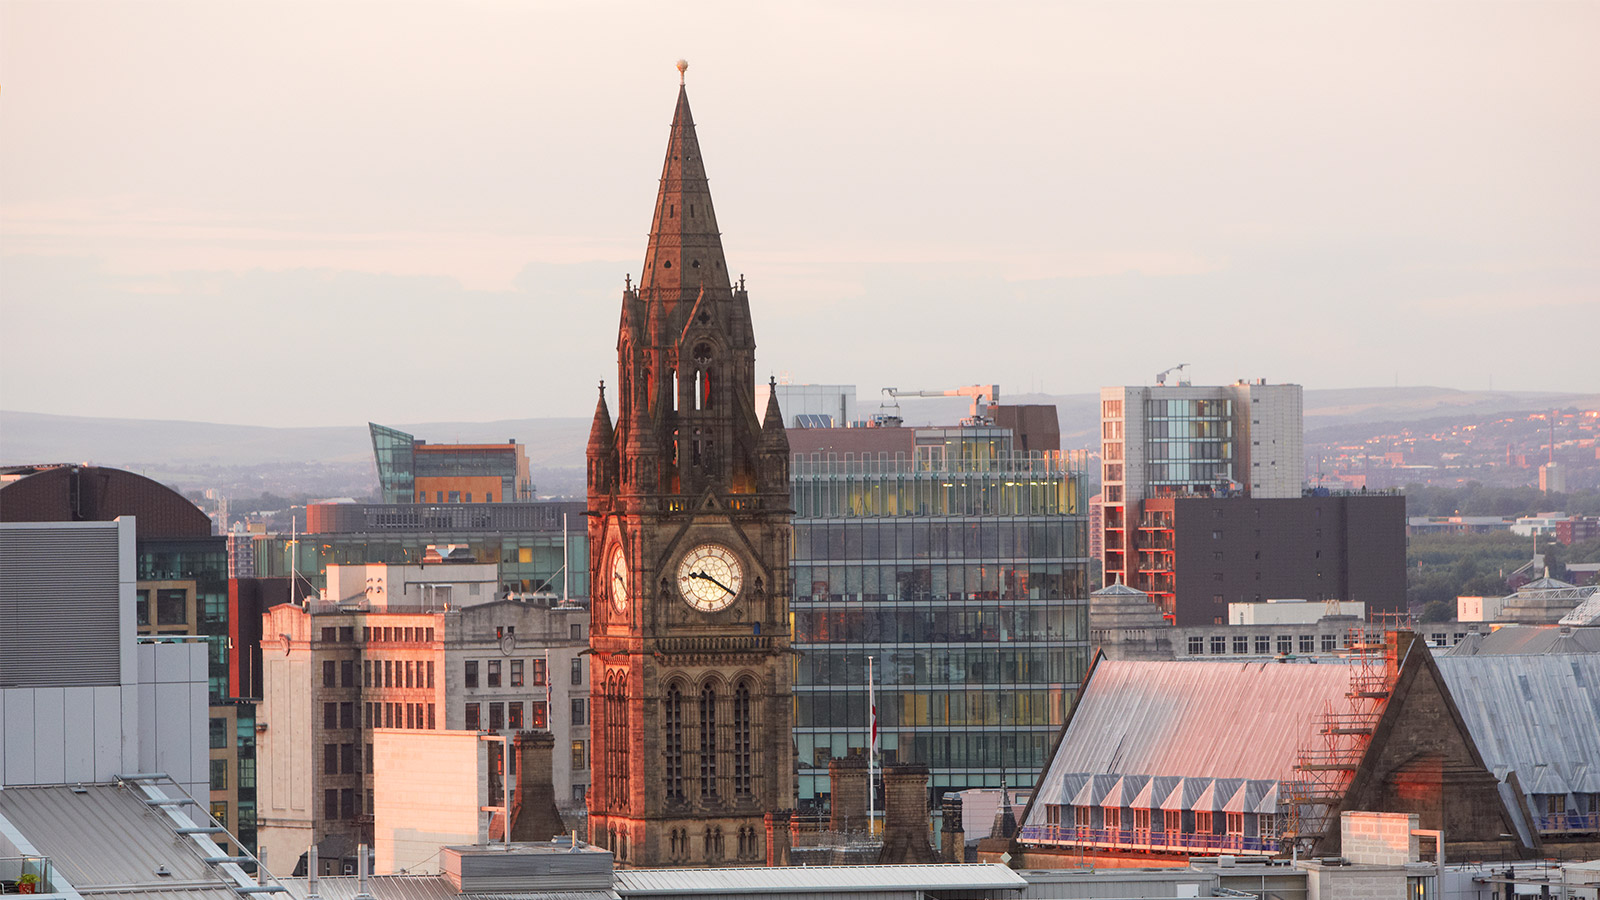 The skyline of the city of Manchester, UK